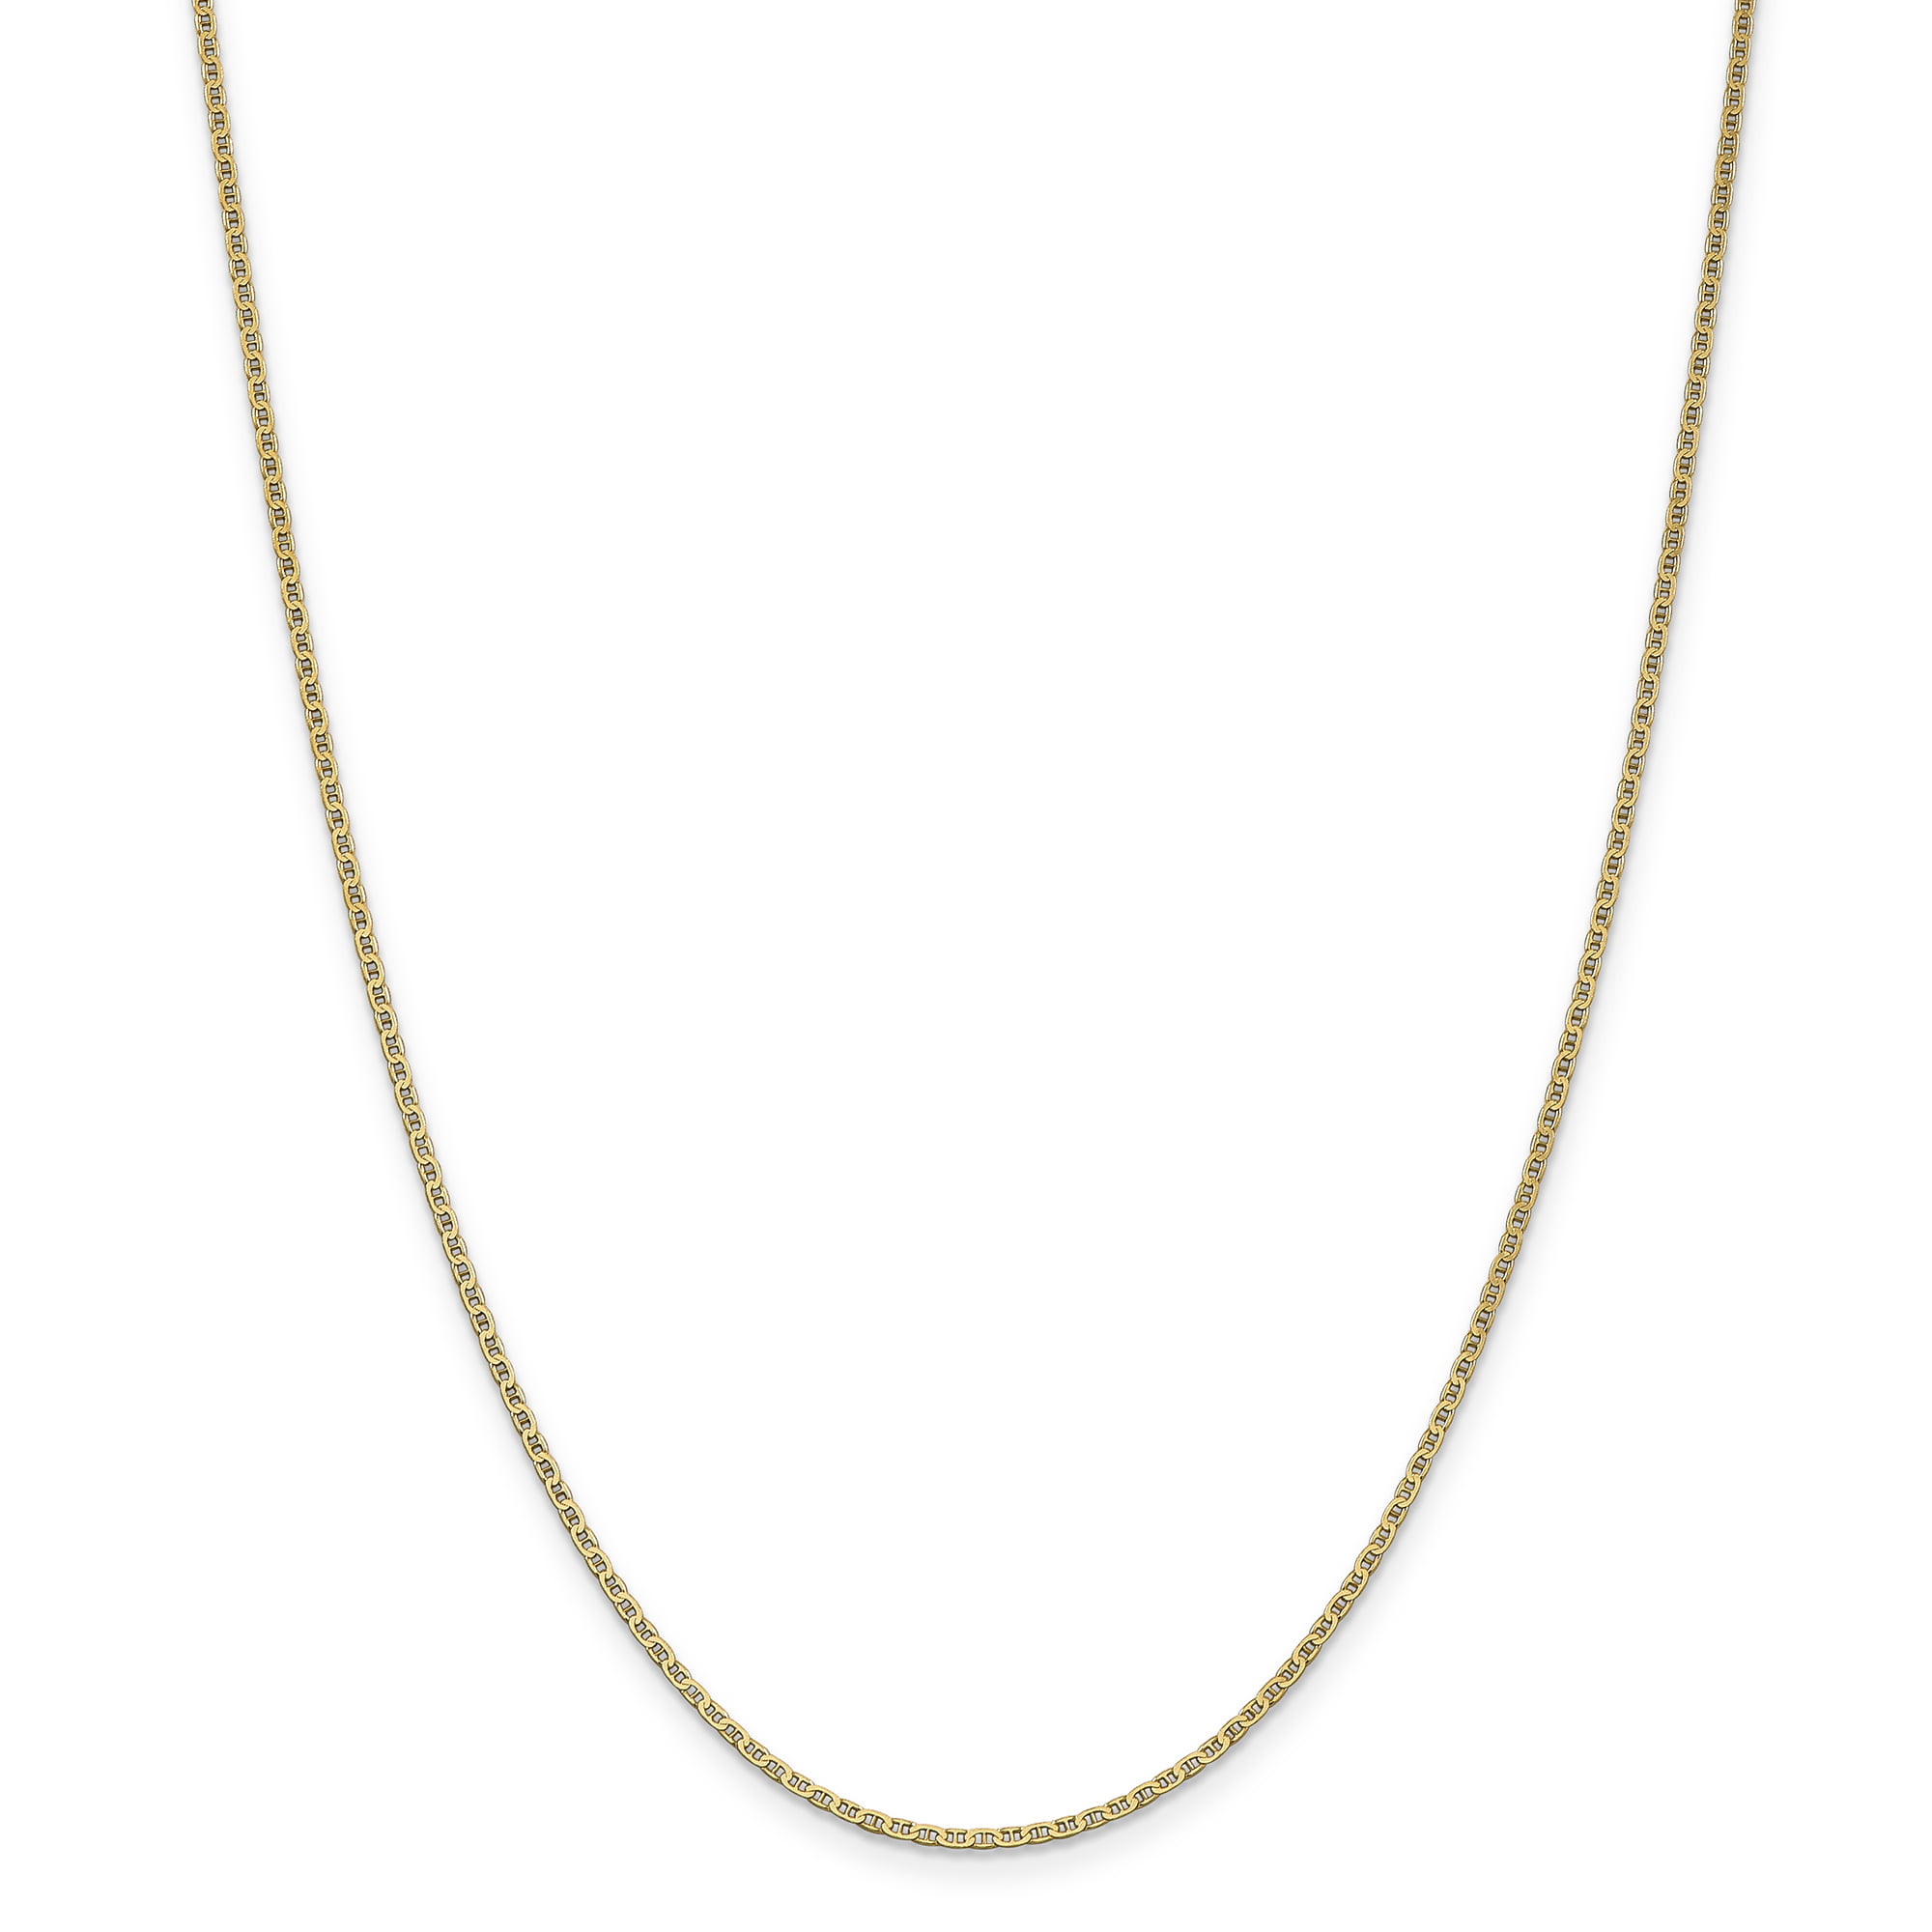 14K 14Kt White Solid Gold 16" 18" 20" .75mm Dainty Cable Chain with Flat Links 